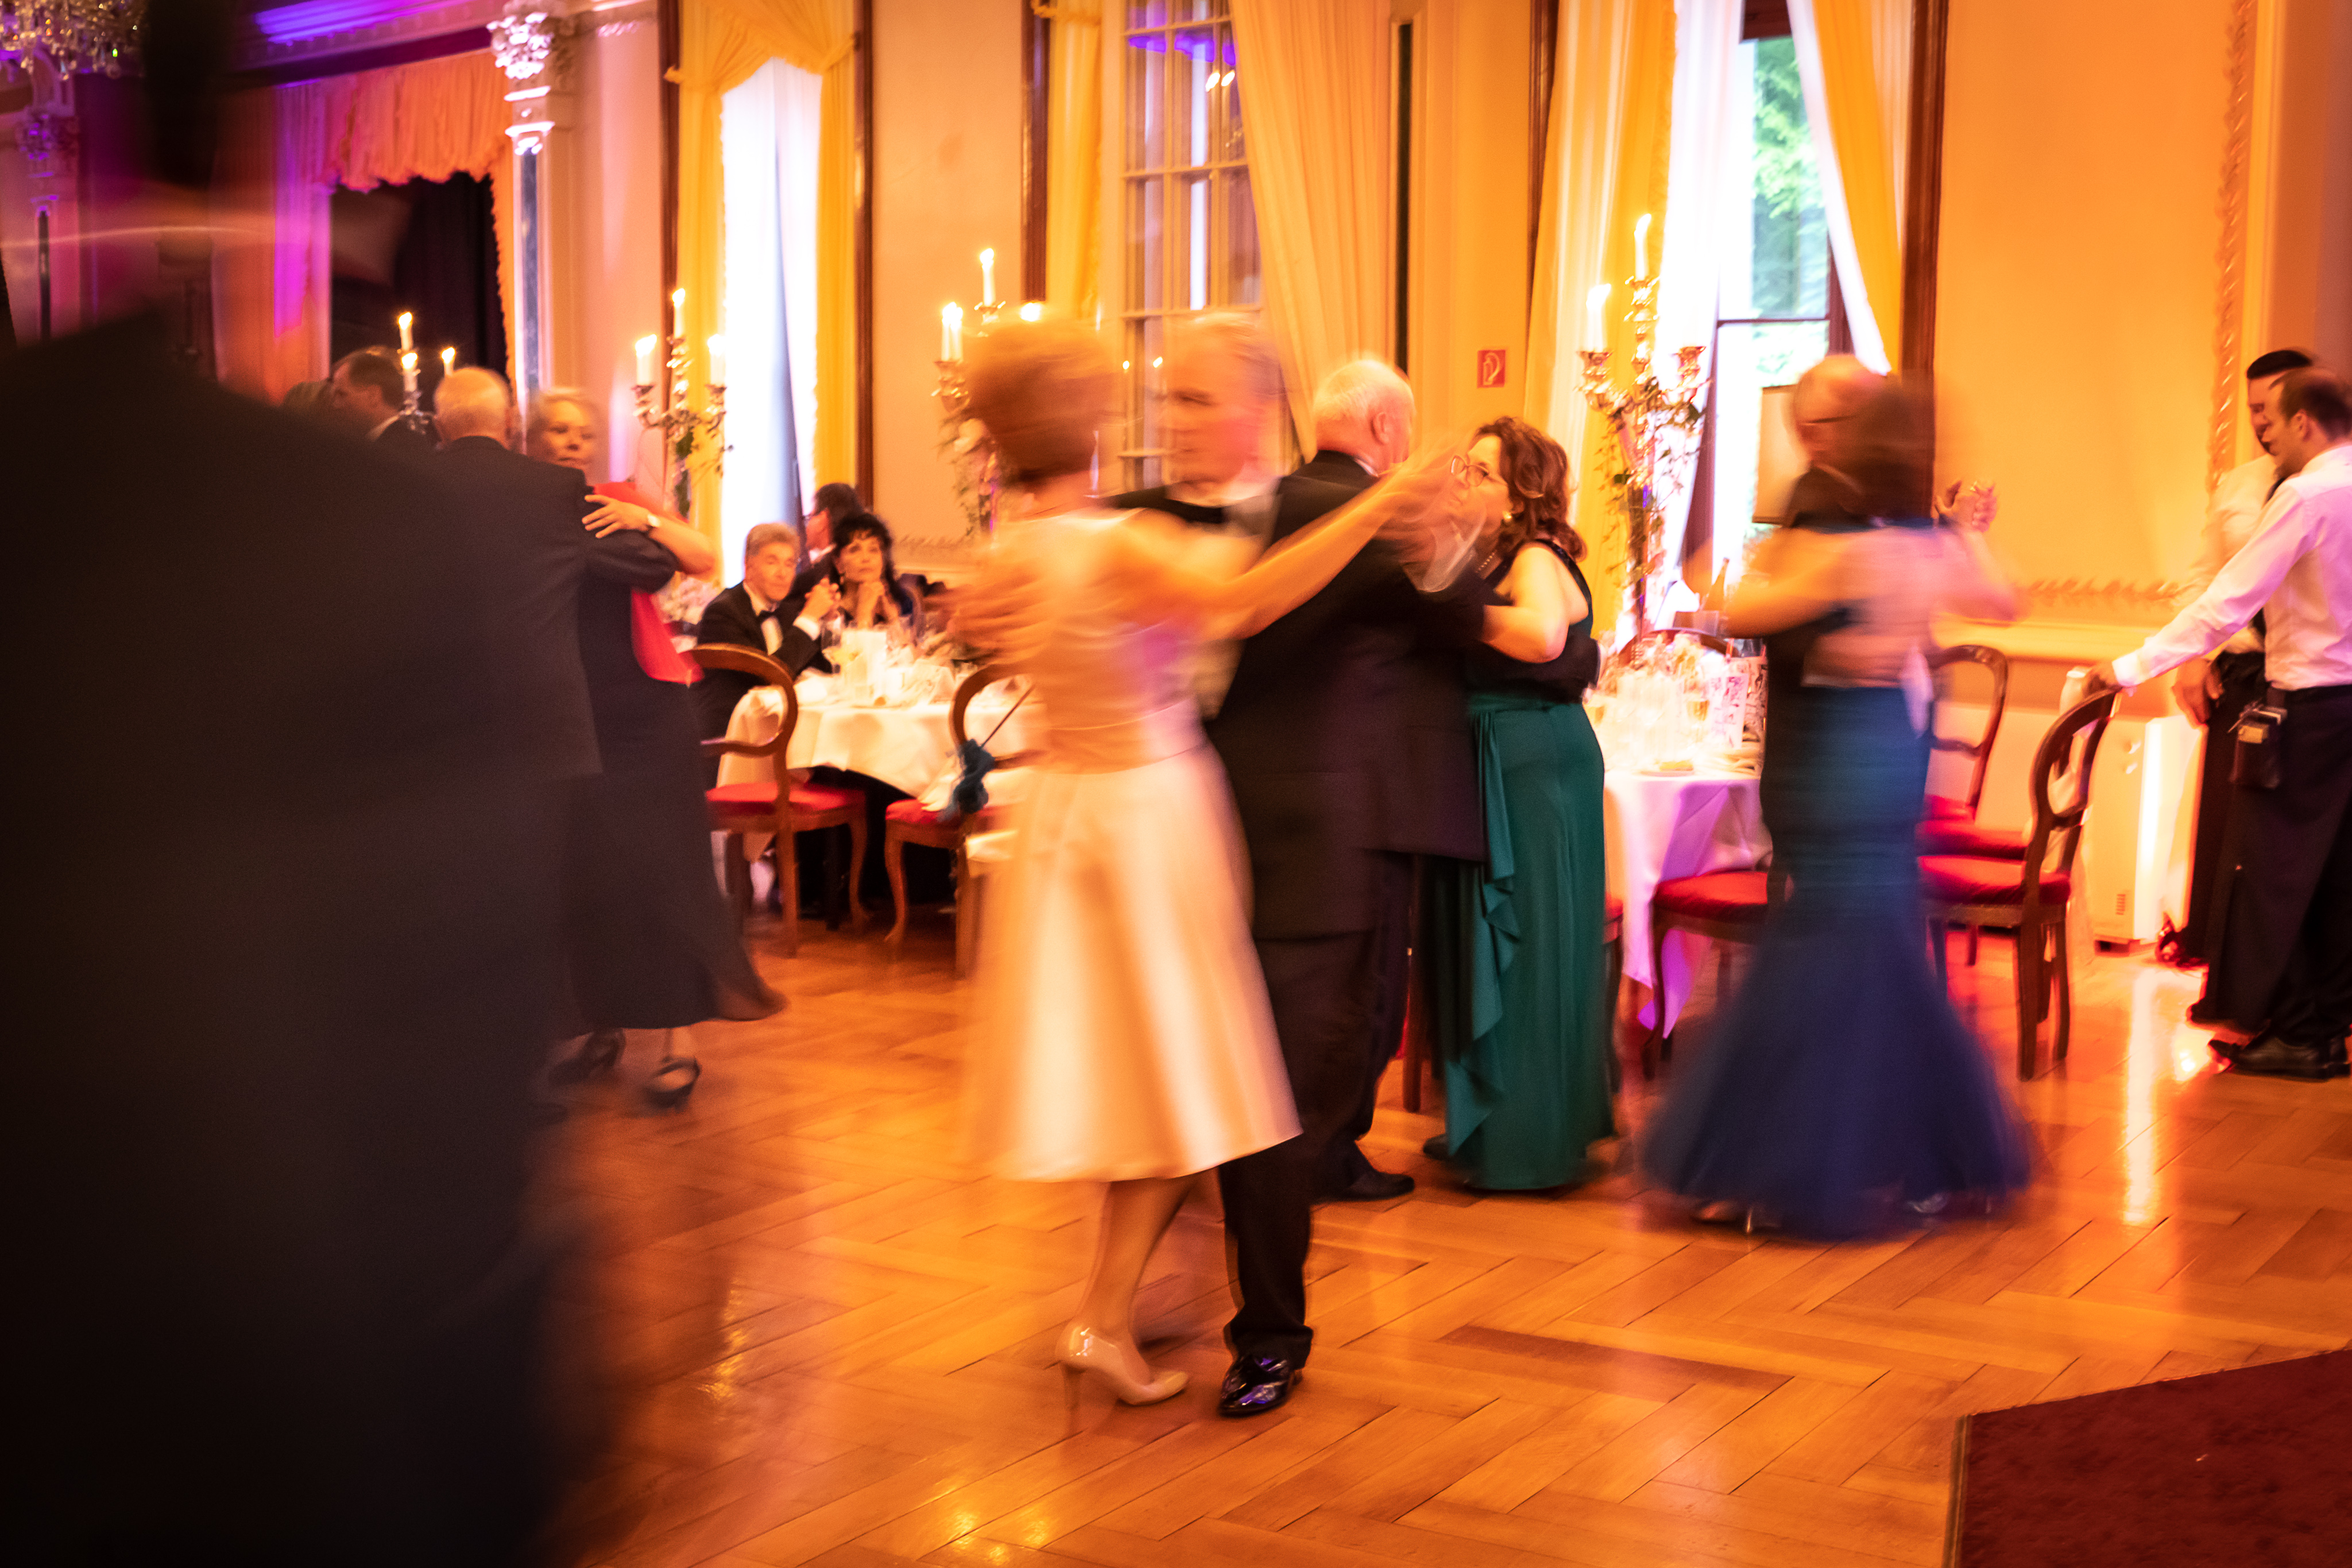 Winter Ball at the Grand Hotel